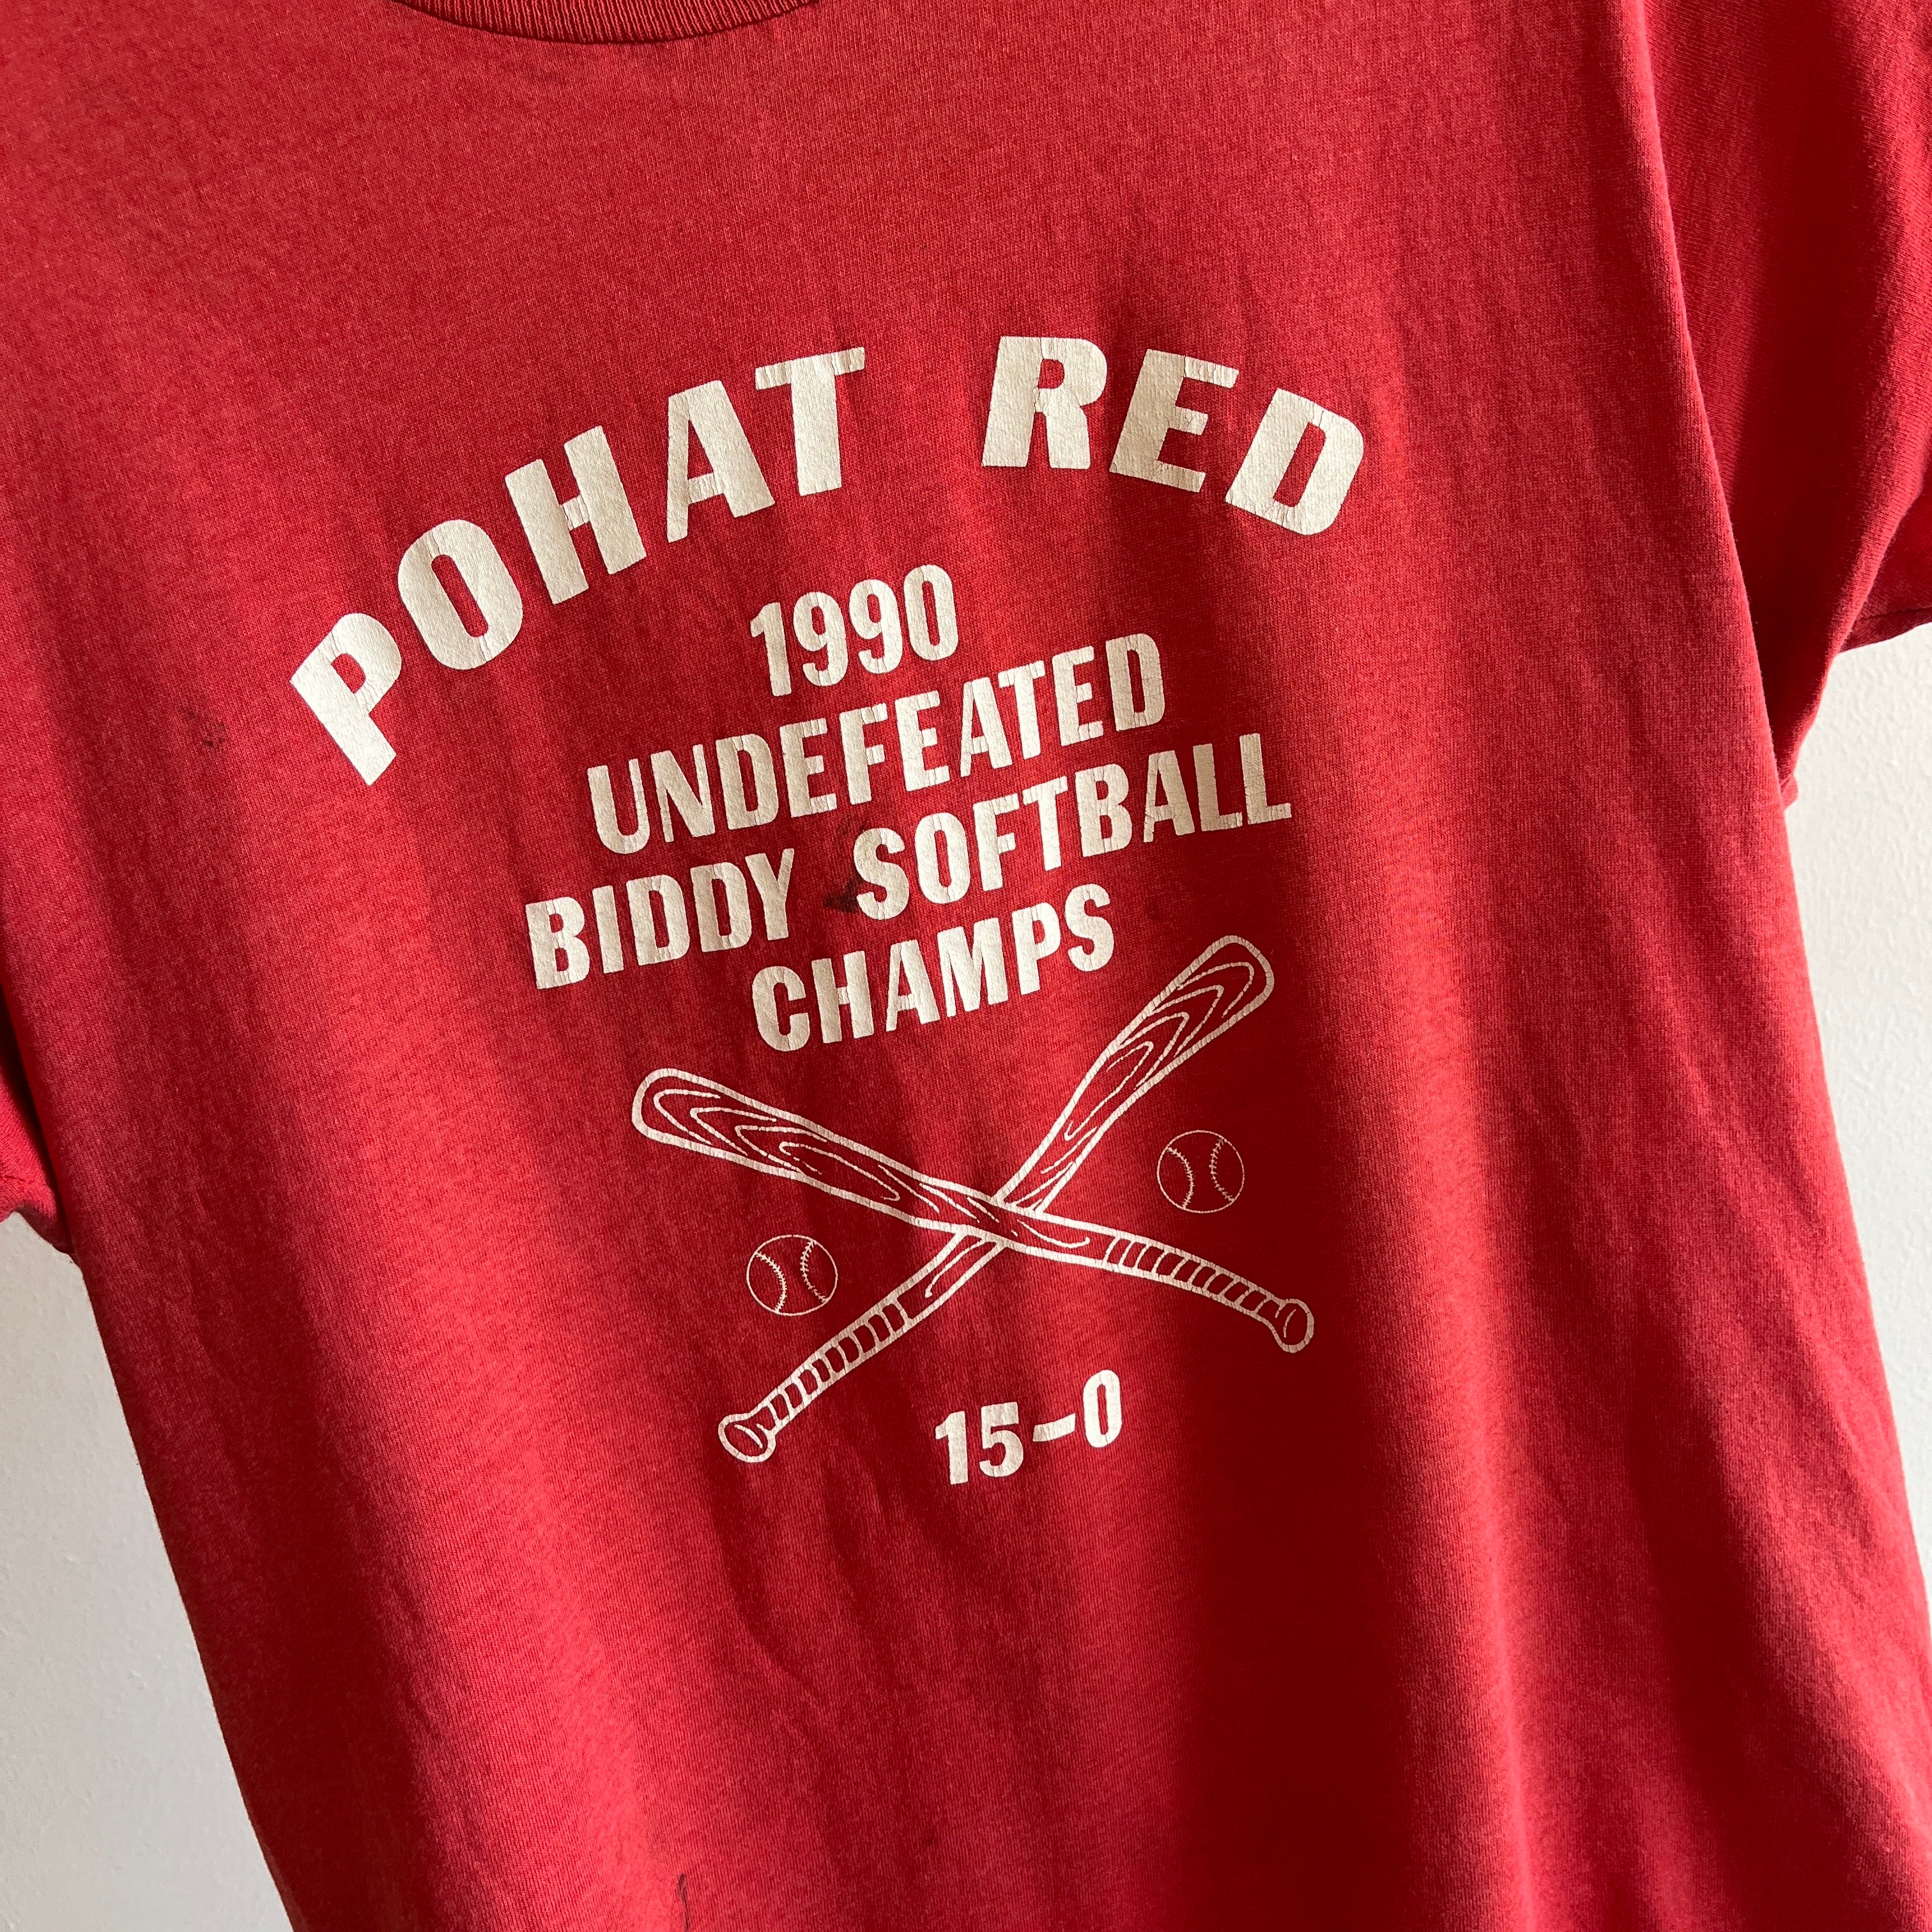 1990 Pohat Red Softball Champs Faded and Worn T-Shirt by Screen Stars